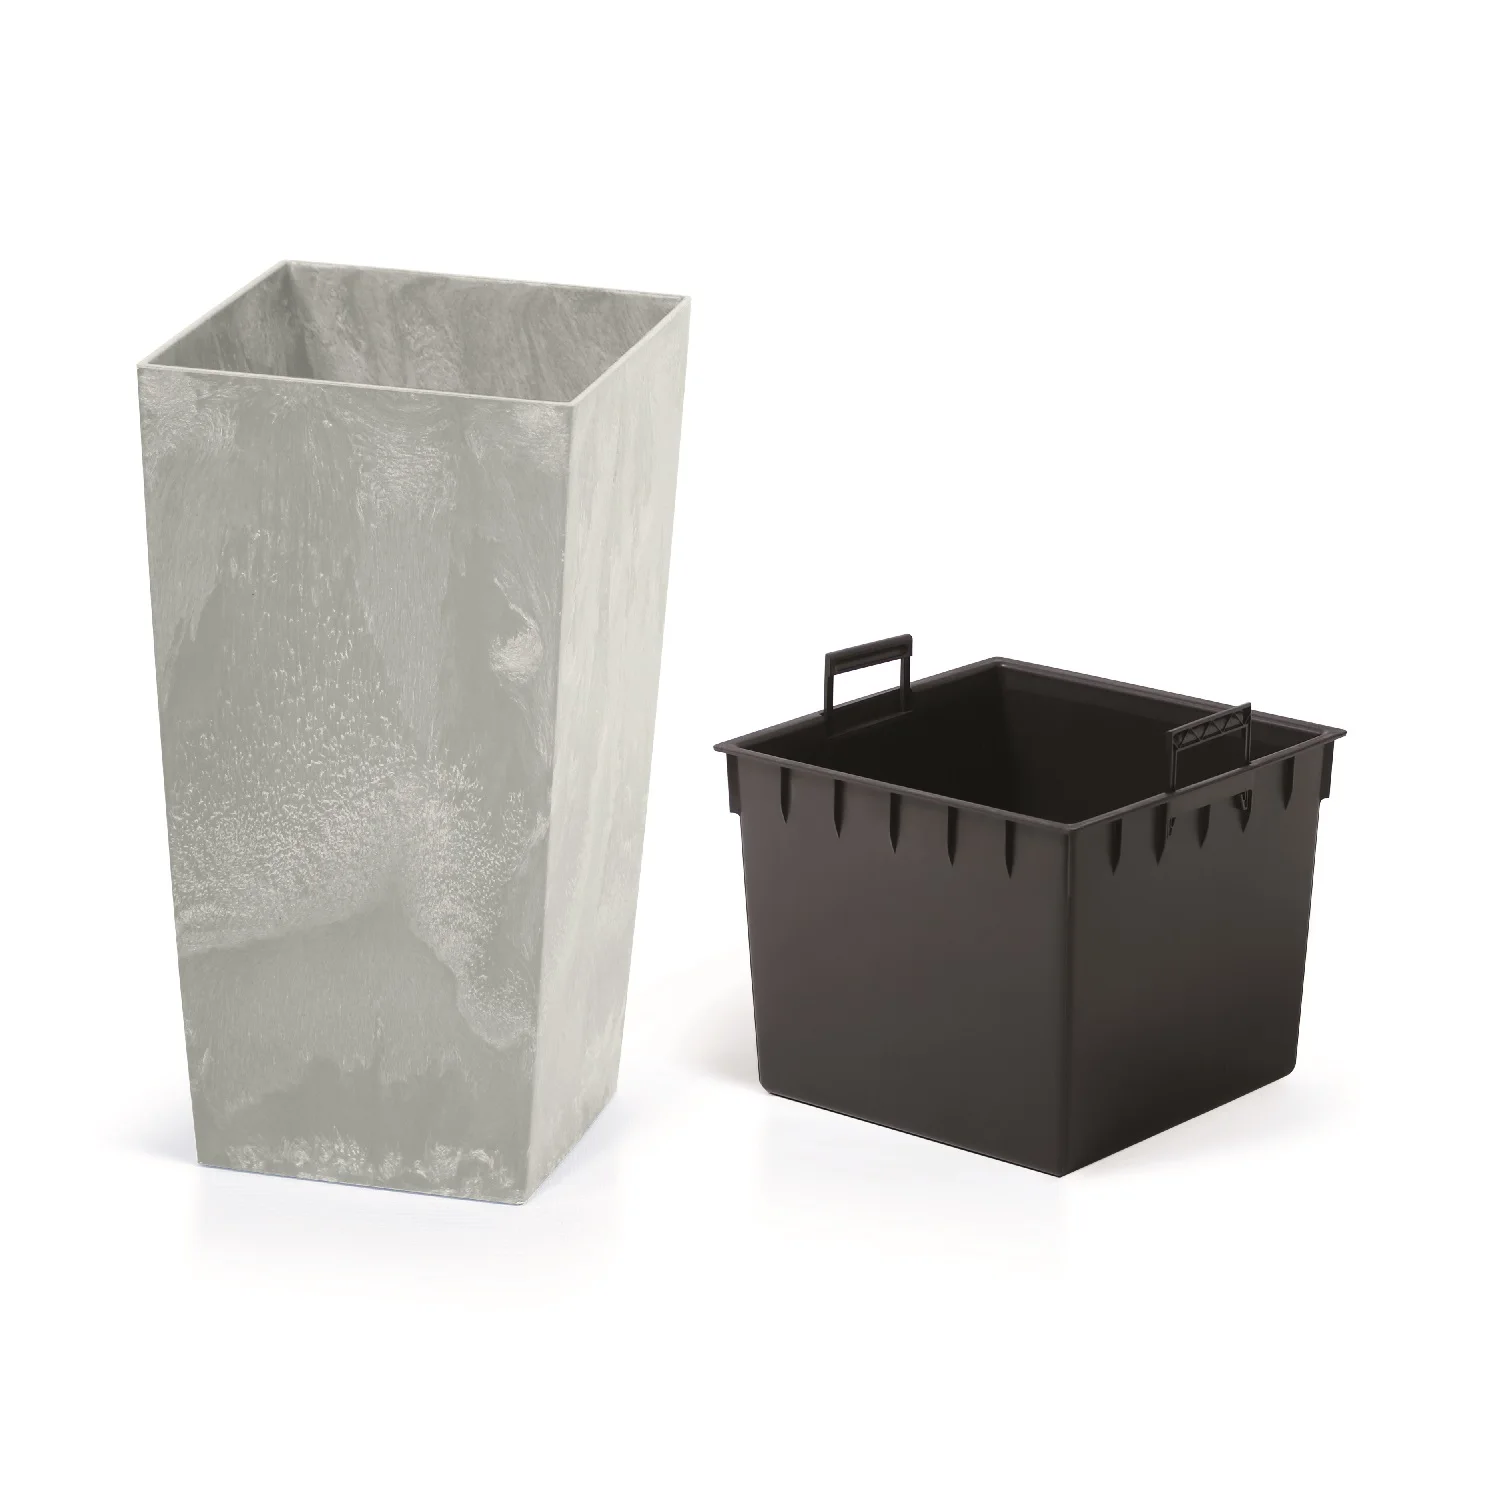 show original title Details about   New flowering pot plastic square modern gloss urbi anthracite 